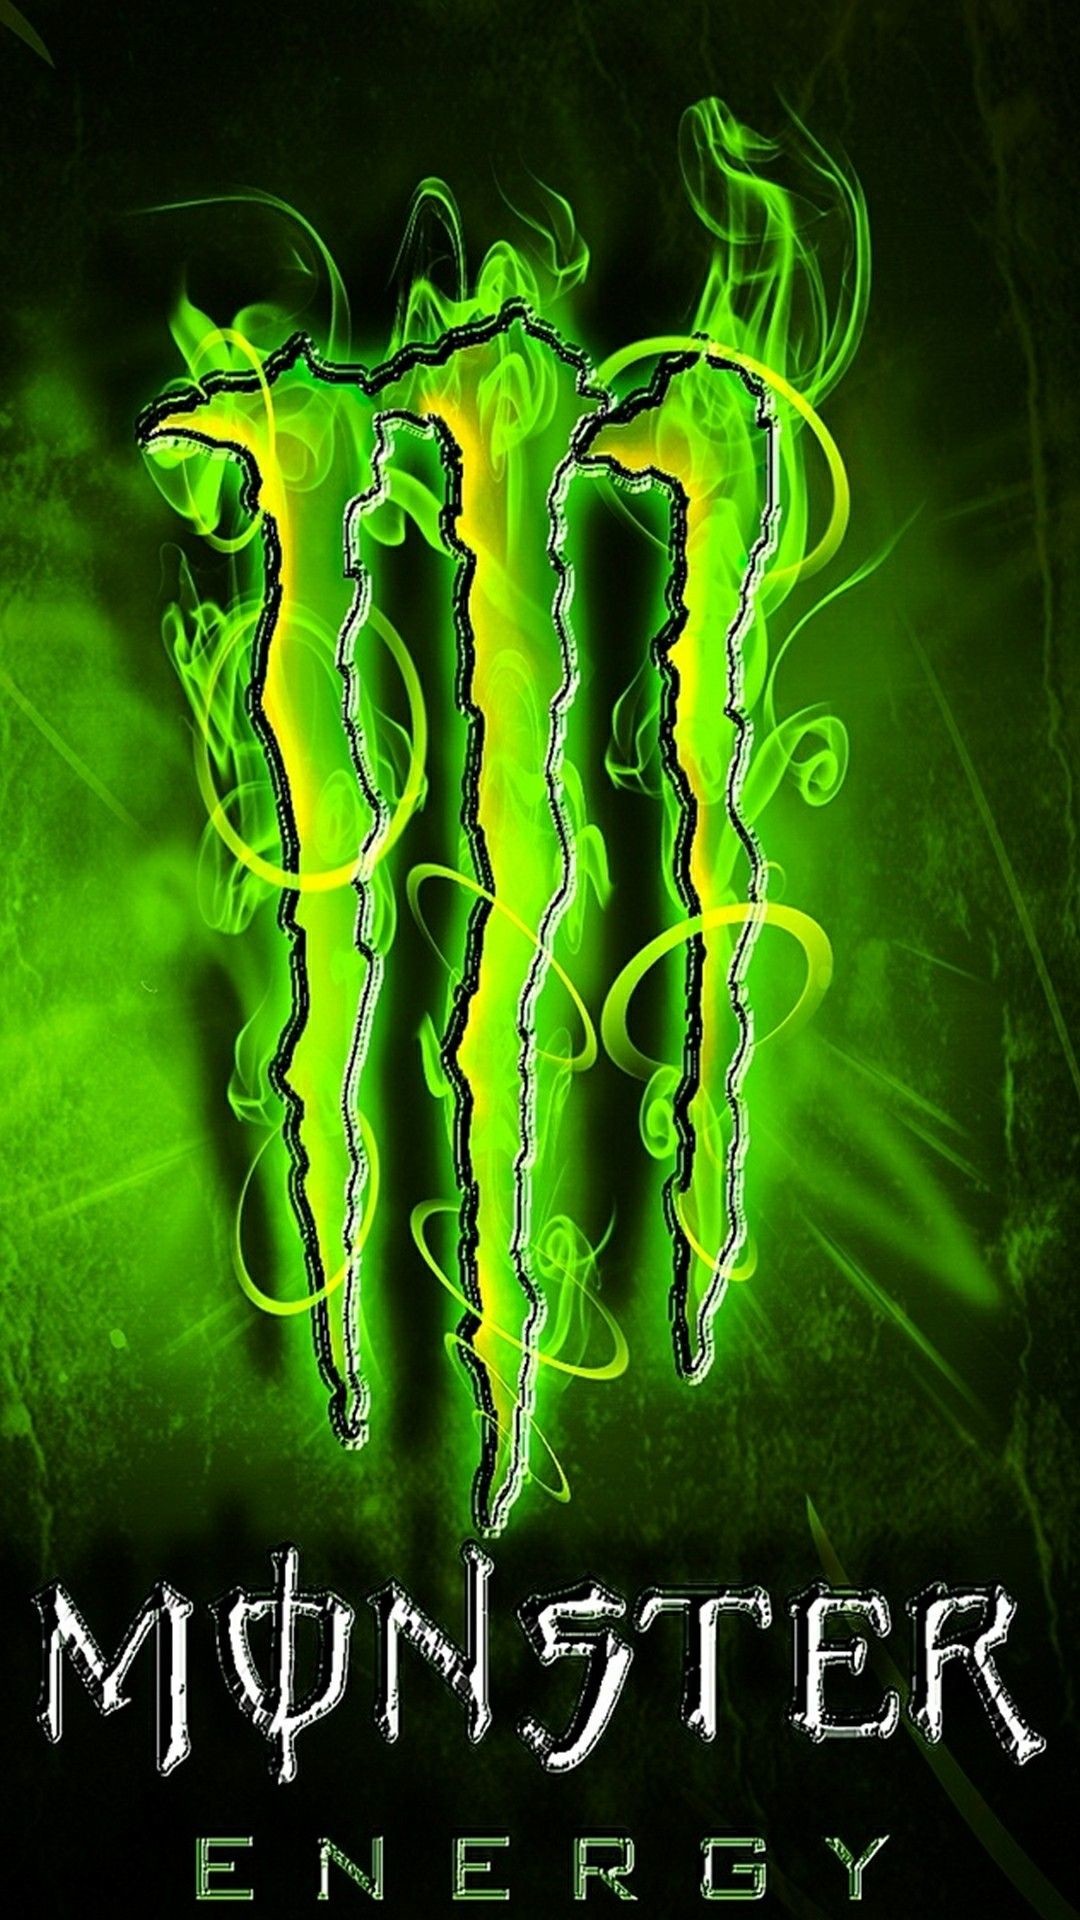 1080x1920 Monster Party, Computer Wallpaper, Hd Iphone 5 Wallpapers, Cool Wallpapers  For Phones,